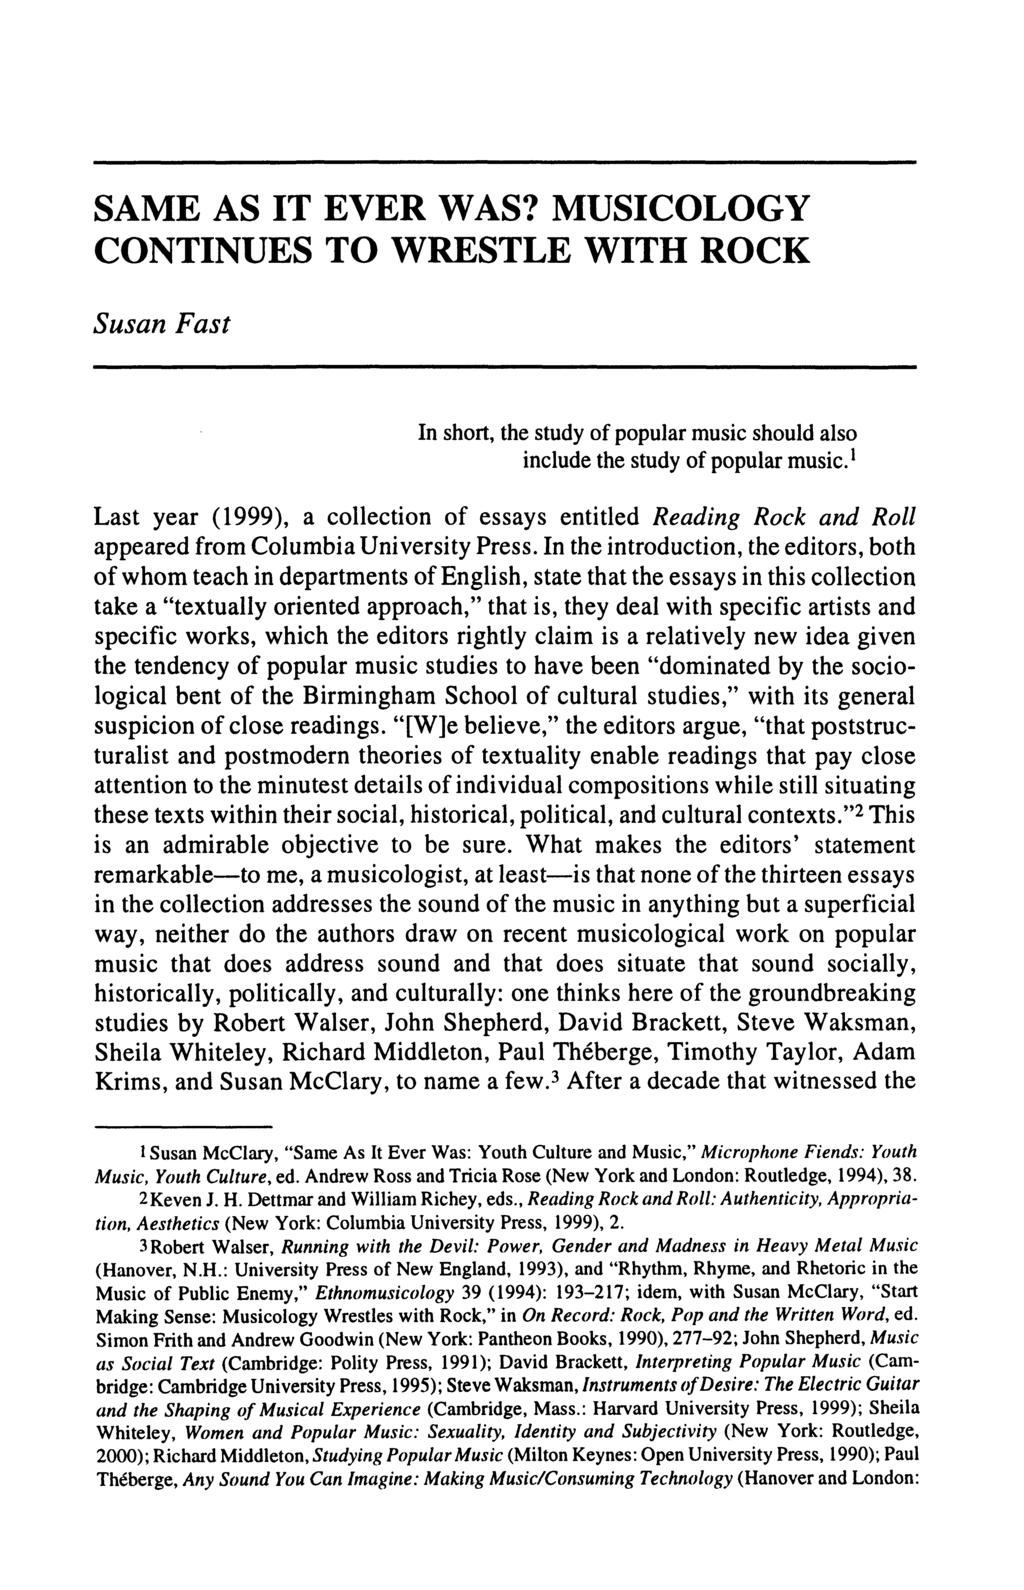 SAME AS IT EVER WAS? MUSICOLOGY CONTINUES TO WRESTLE WITH ROCK Susan Fast In short, the study of popular music should also include the study of popular music.